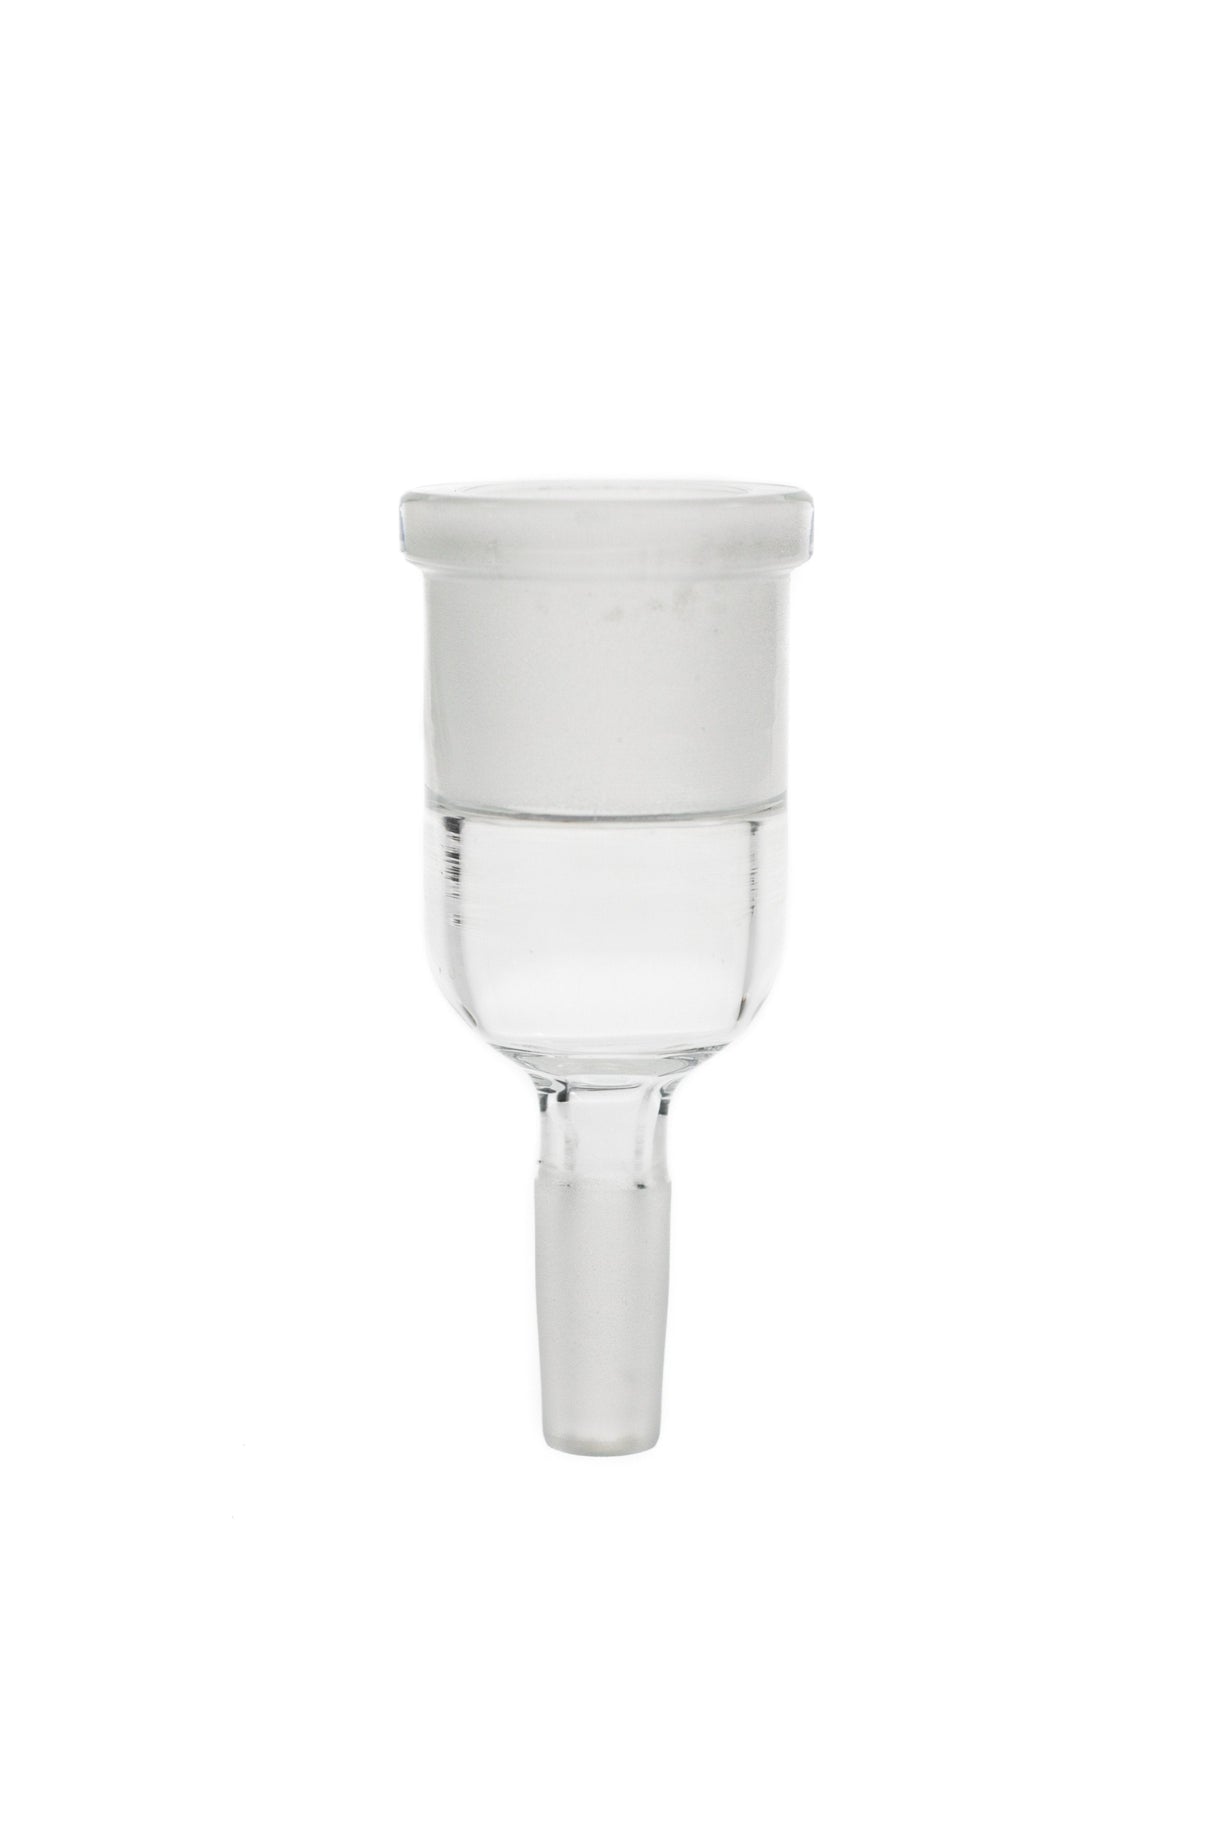 TAG clear glass male to female bong adapter, compact design, front view on white background